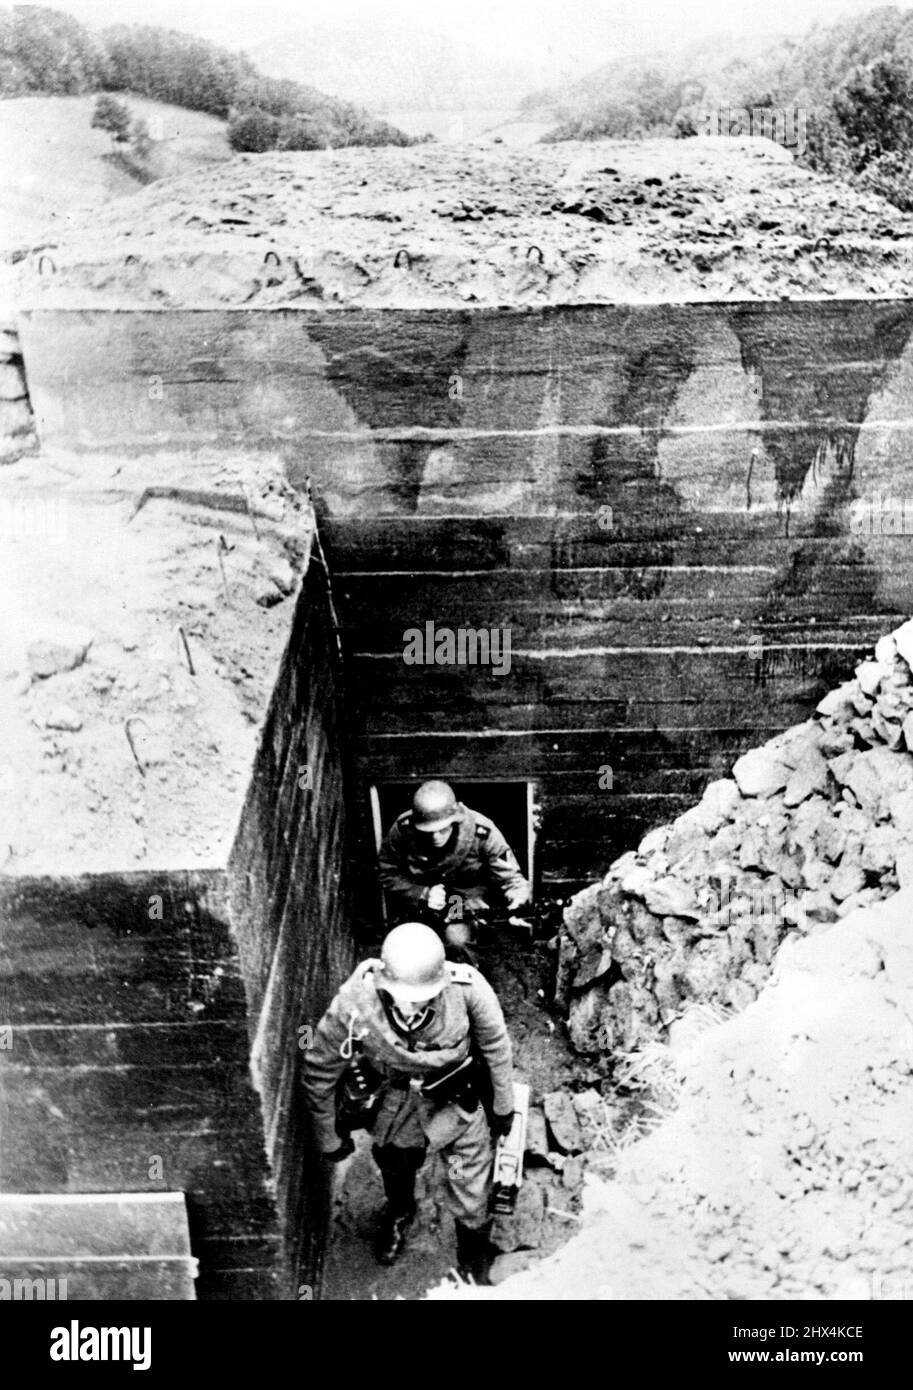 First Pictures Of Germany's Siegfried Line -- Members of a machine gun corps leaving their underground emplacement. These are the first pictures of Germany's new Siegfried line fortifications along that Western frontiers, described as 'The most modern ad astounding works of our time'. October 25, 1938. (Photo by Keystone). Stock Photo